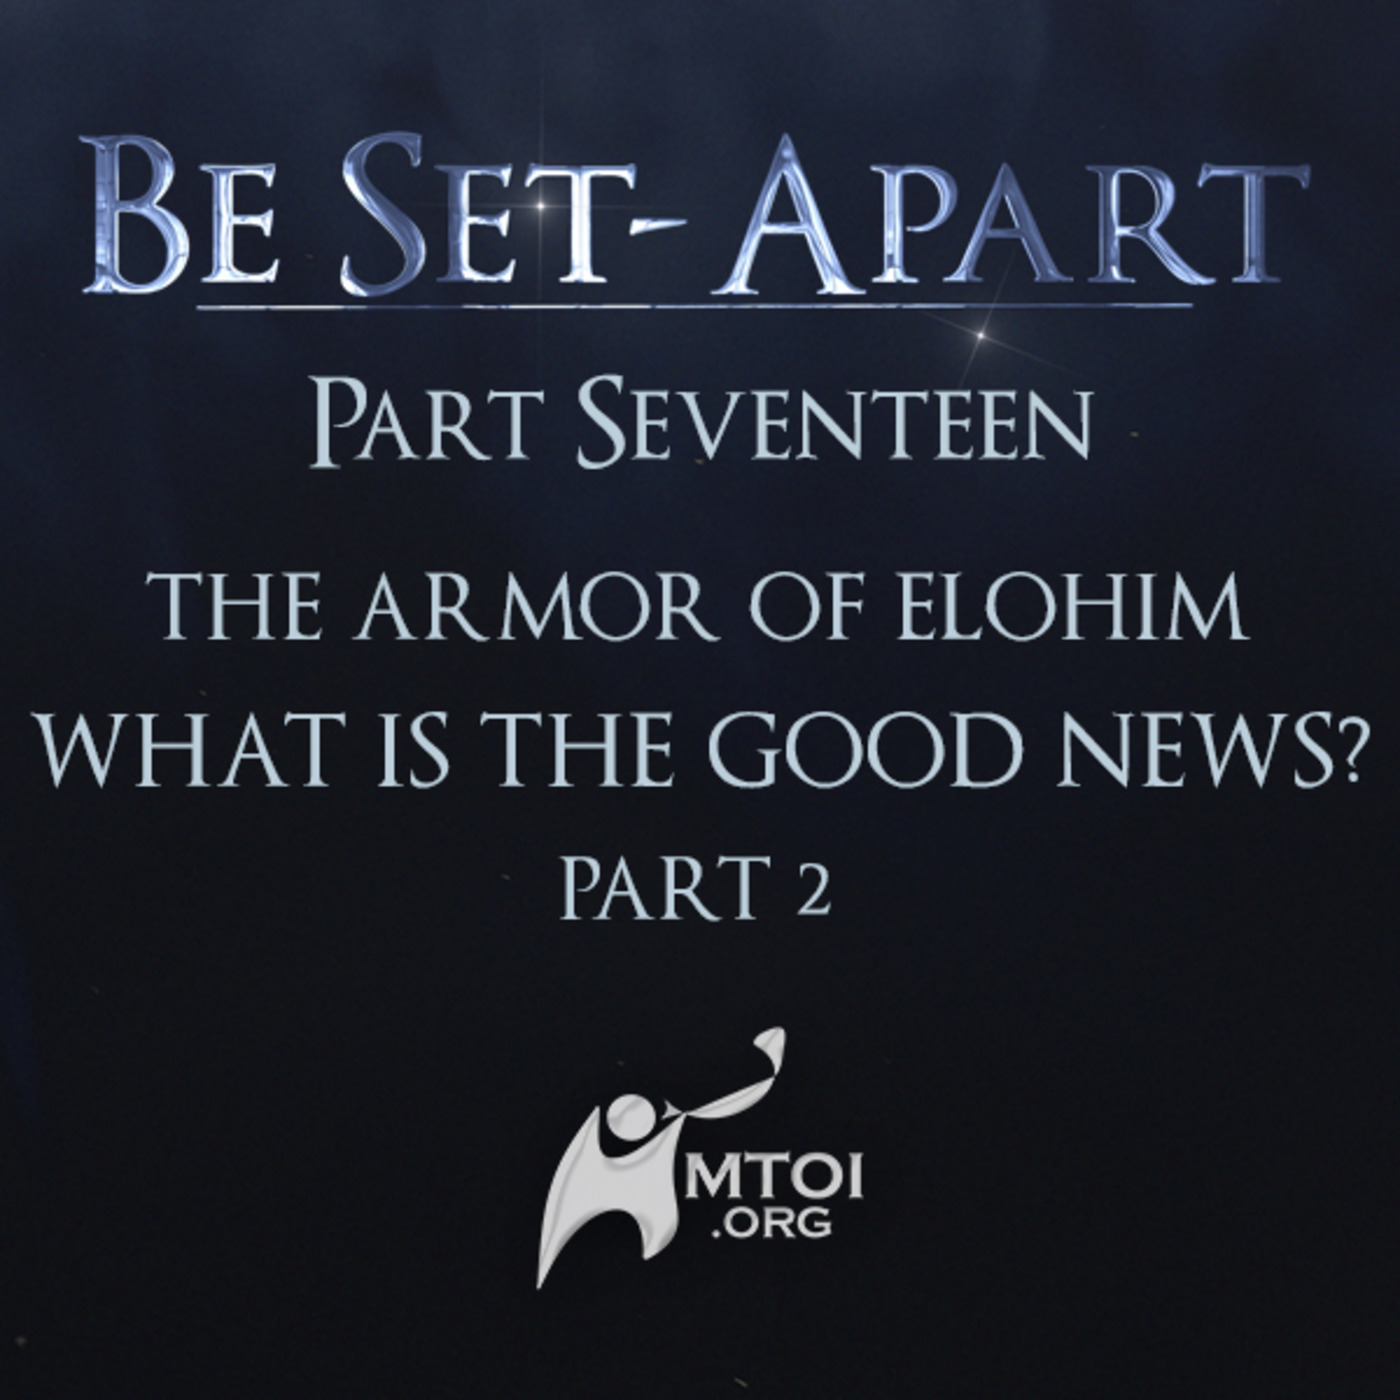 Episode 798: Be Set-Apart | Part Seventeen | The Armor of Elohim | What is the Good News? Part 2